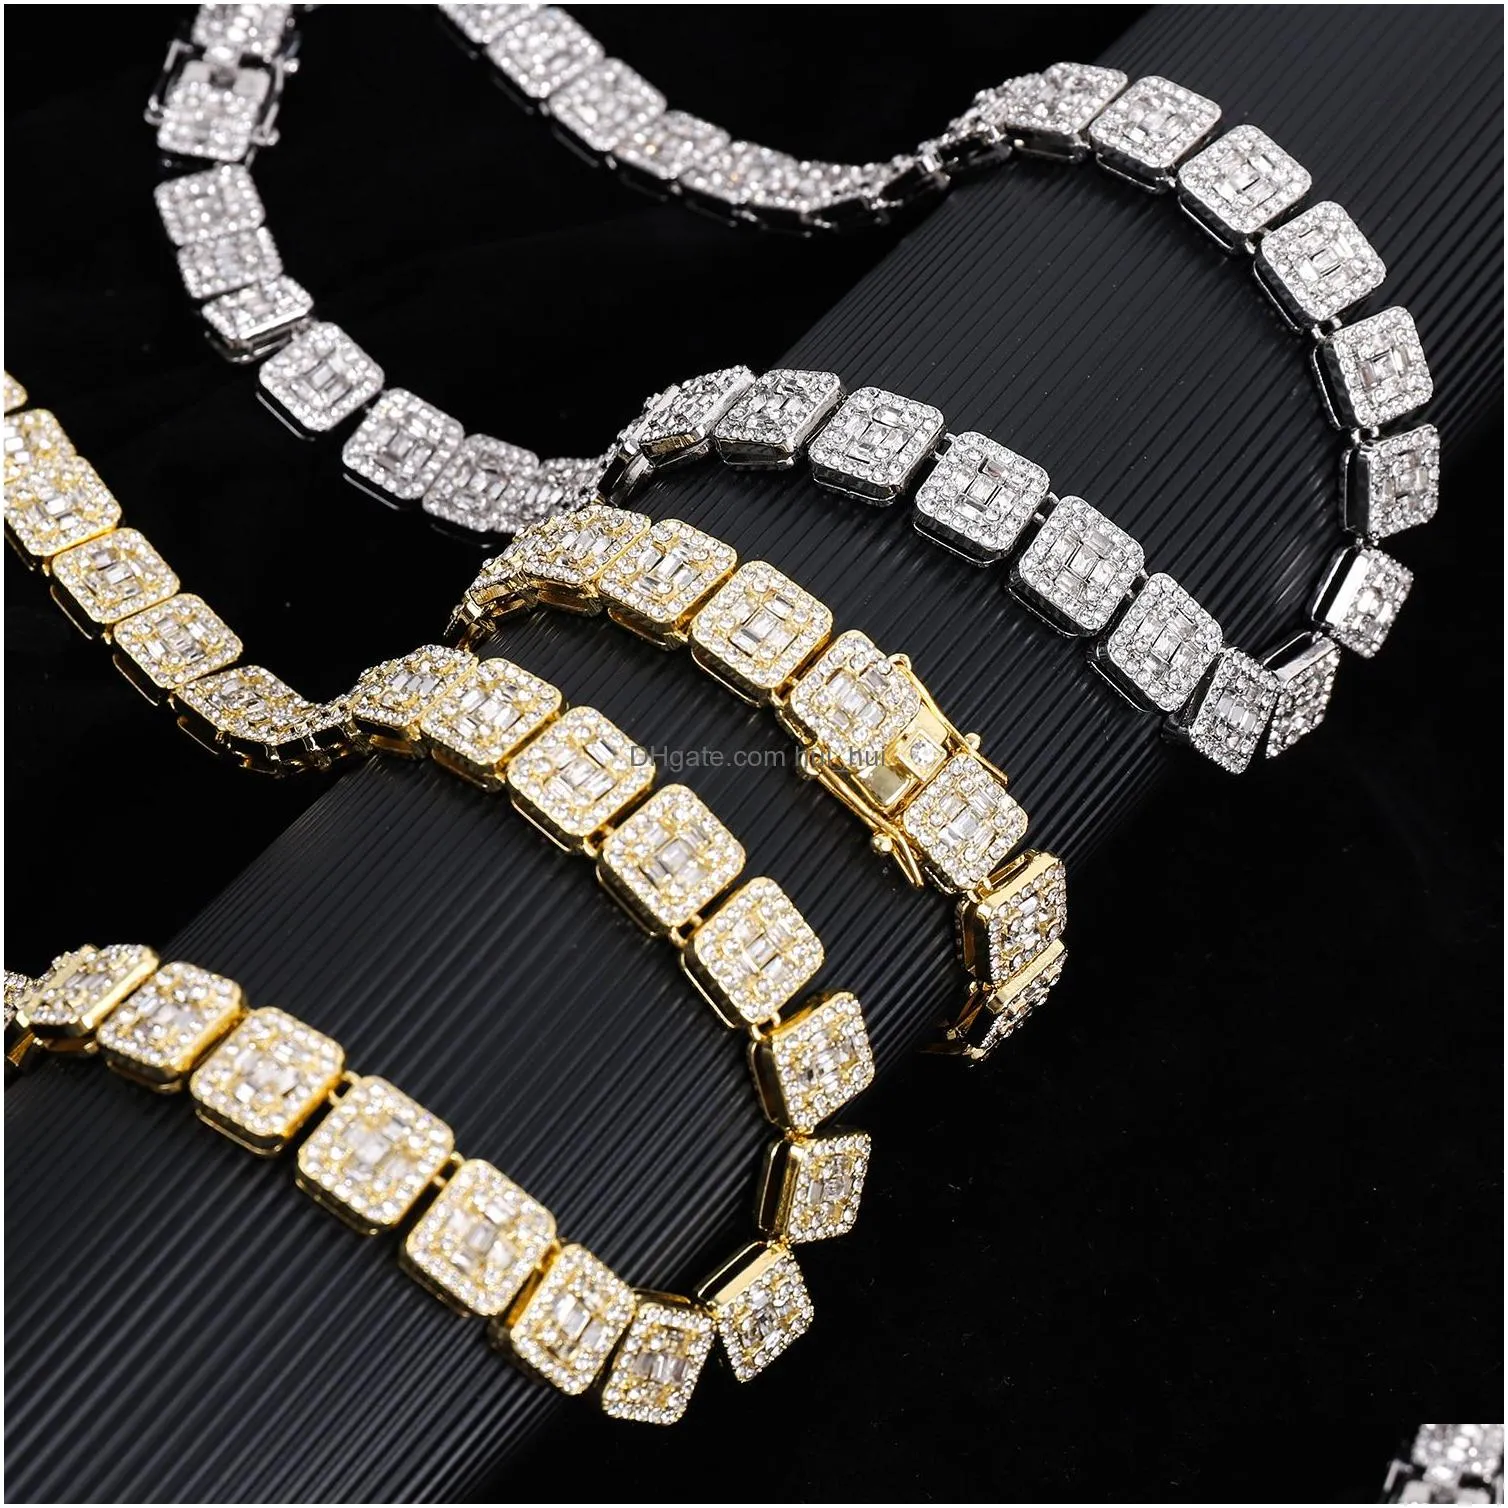 13mm women square tennis chain iced out micro pave 1 row aaa water diamond cuban link necklace bracelet silver gold plated fashion bling hip hop jewelry